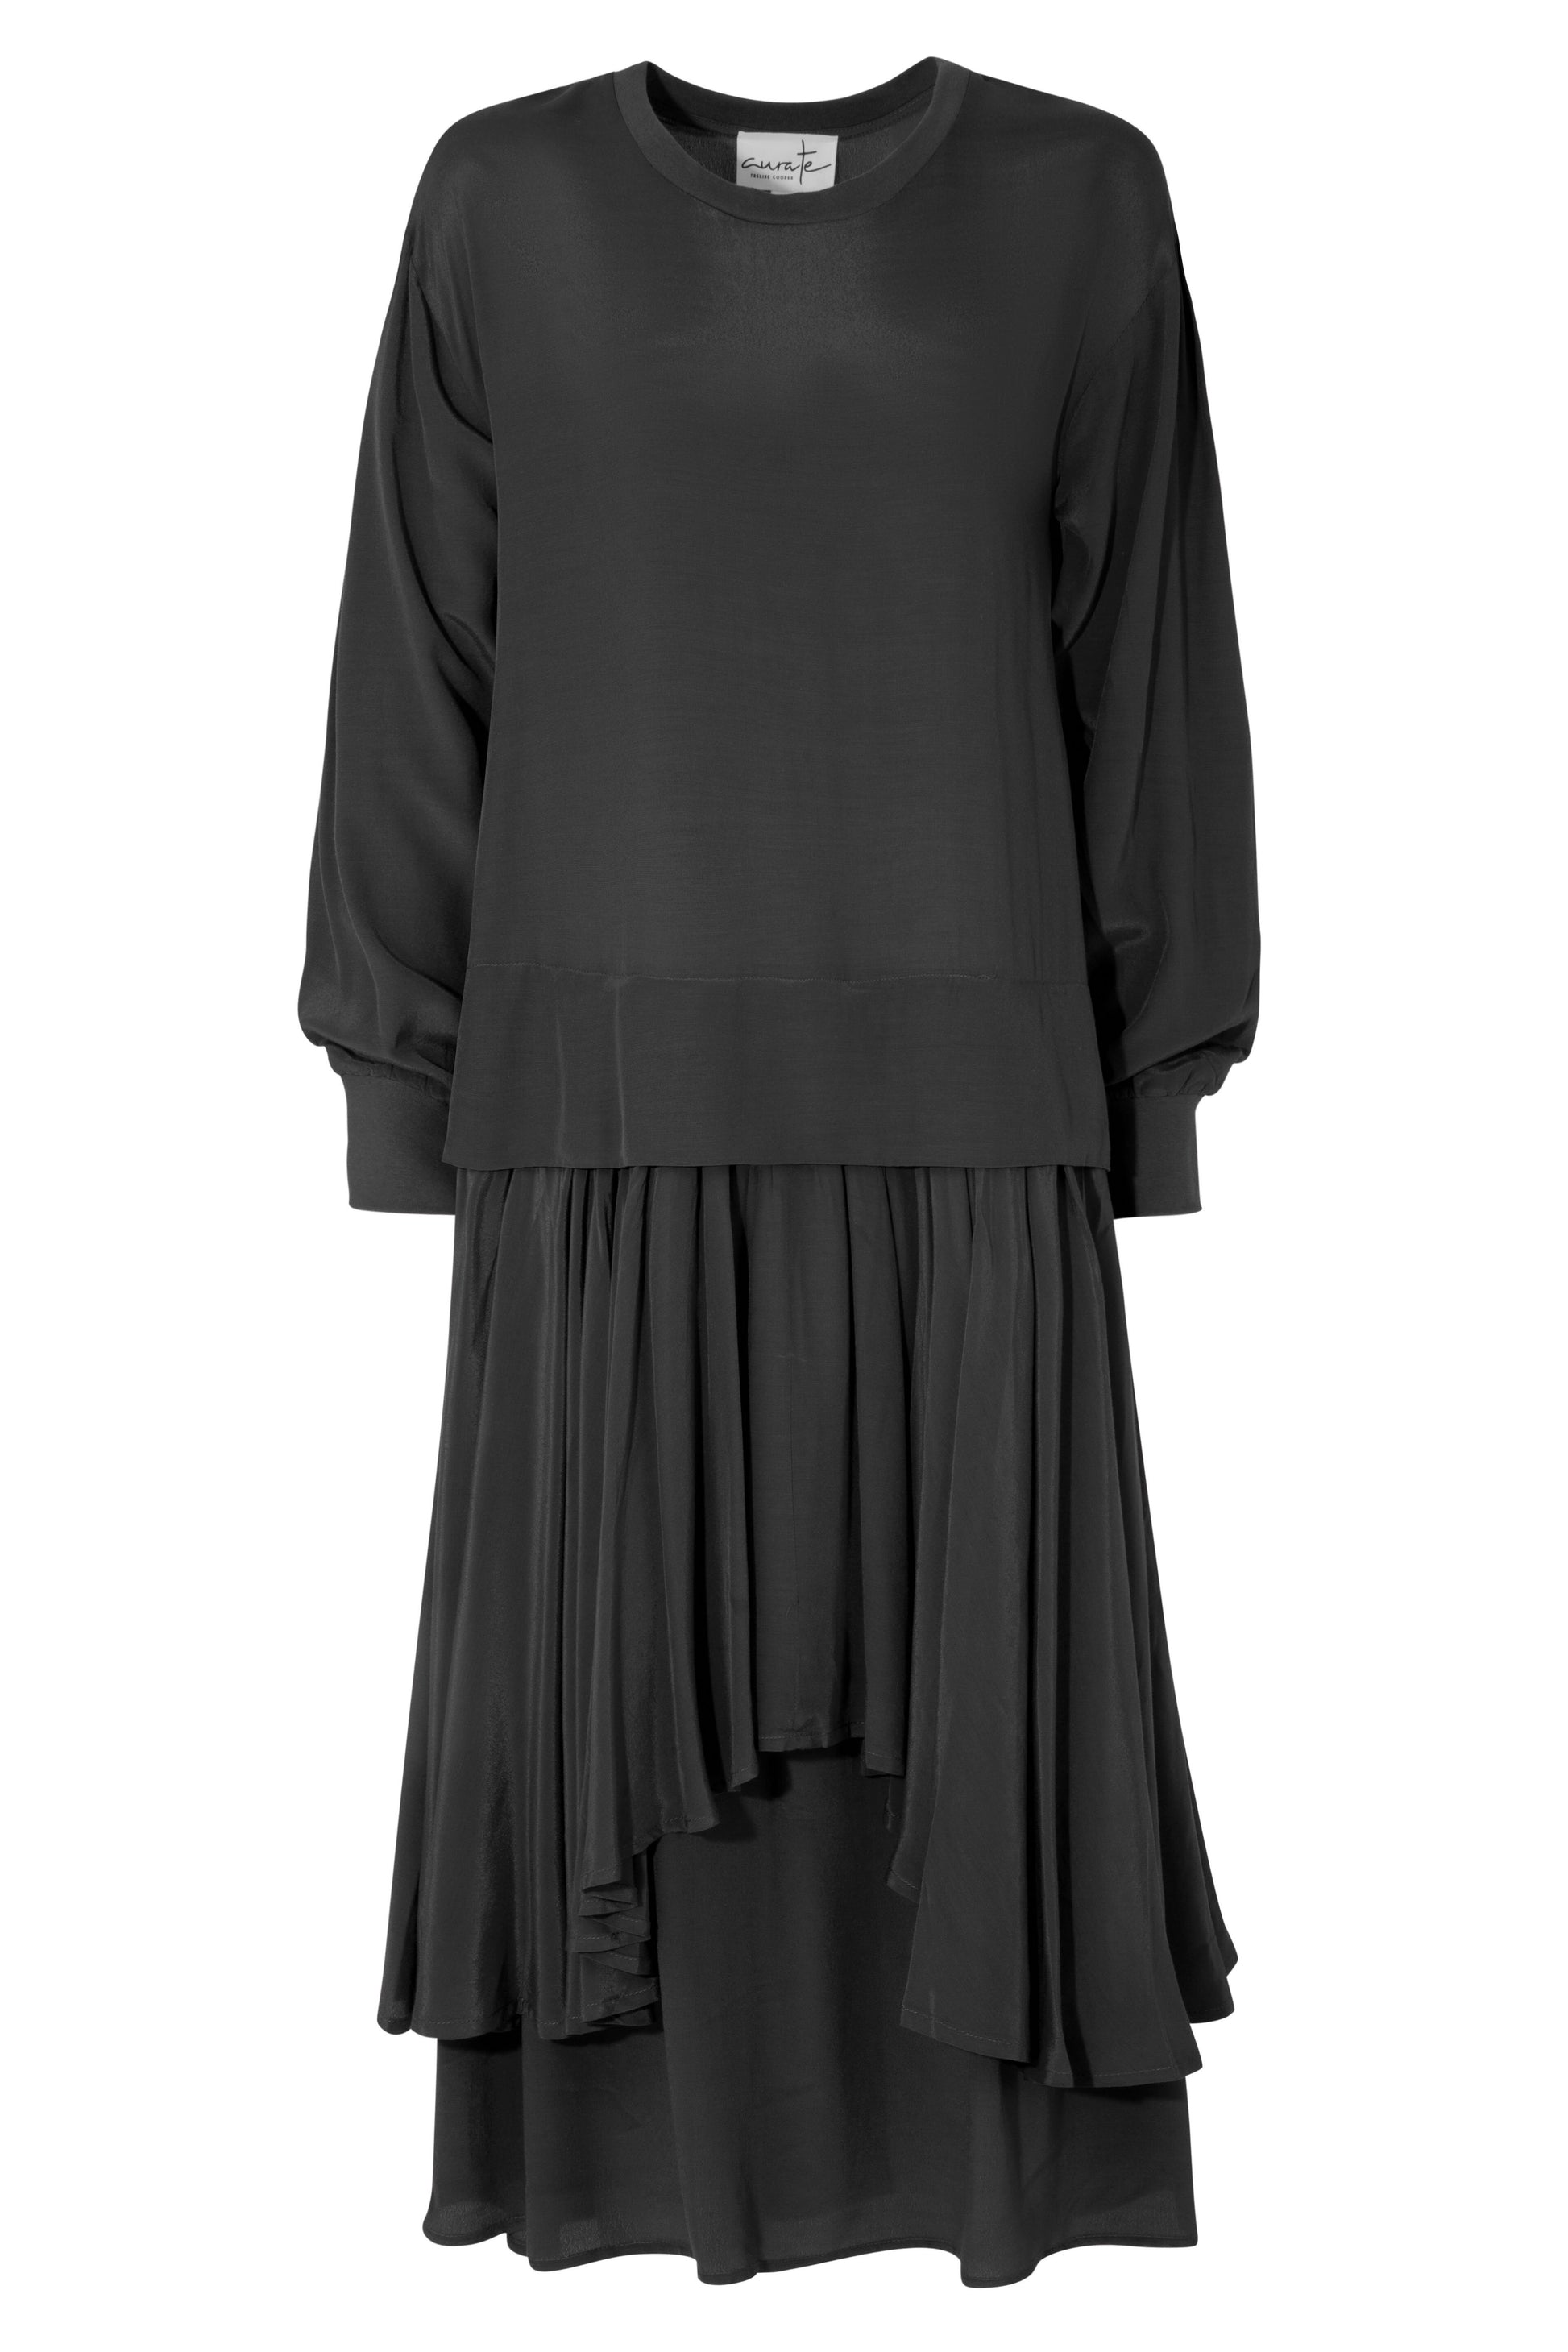 CURATE ALL YOU NEED DRESS - BLACK - THE VOGUE STORE